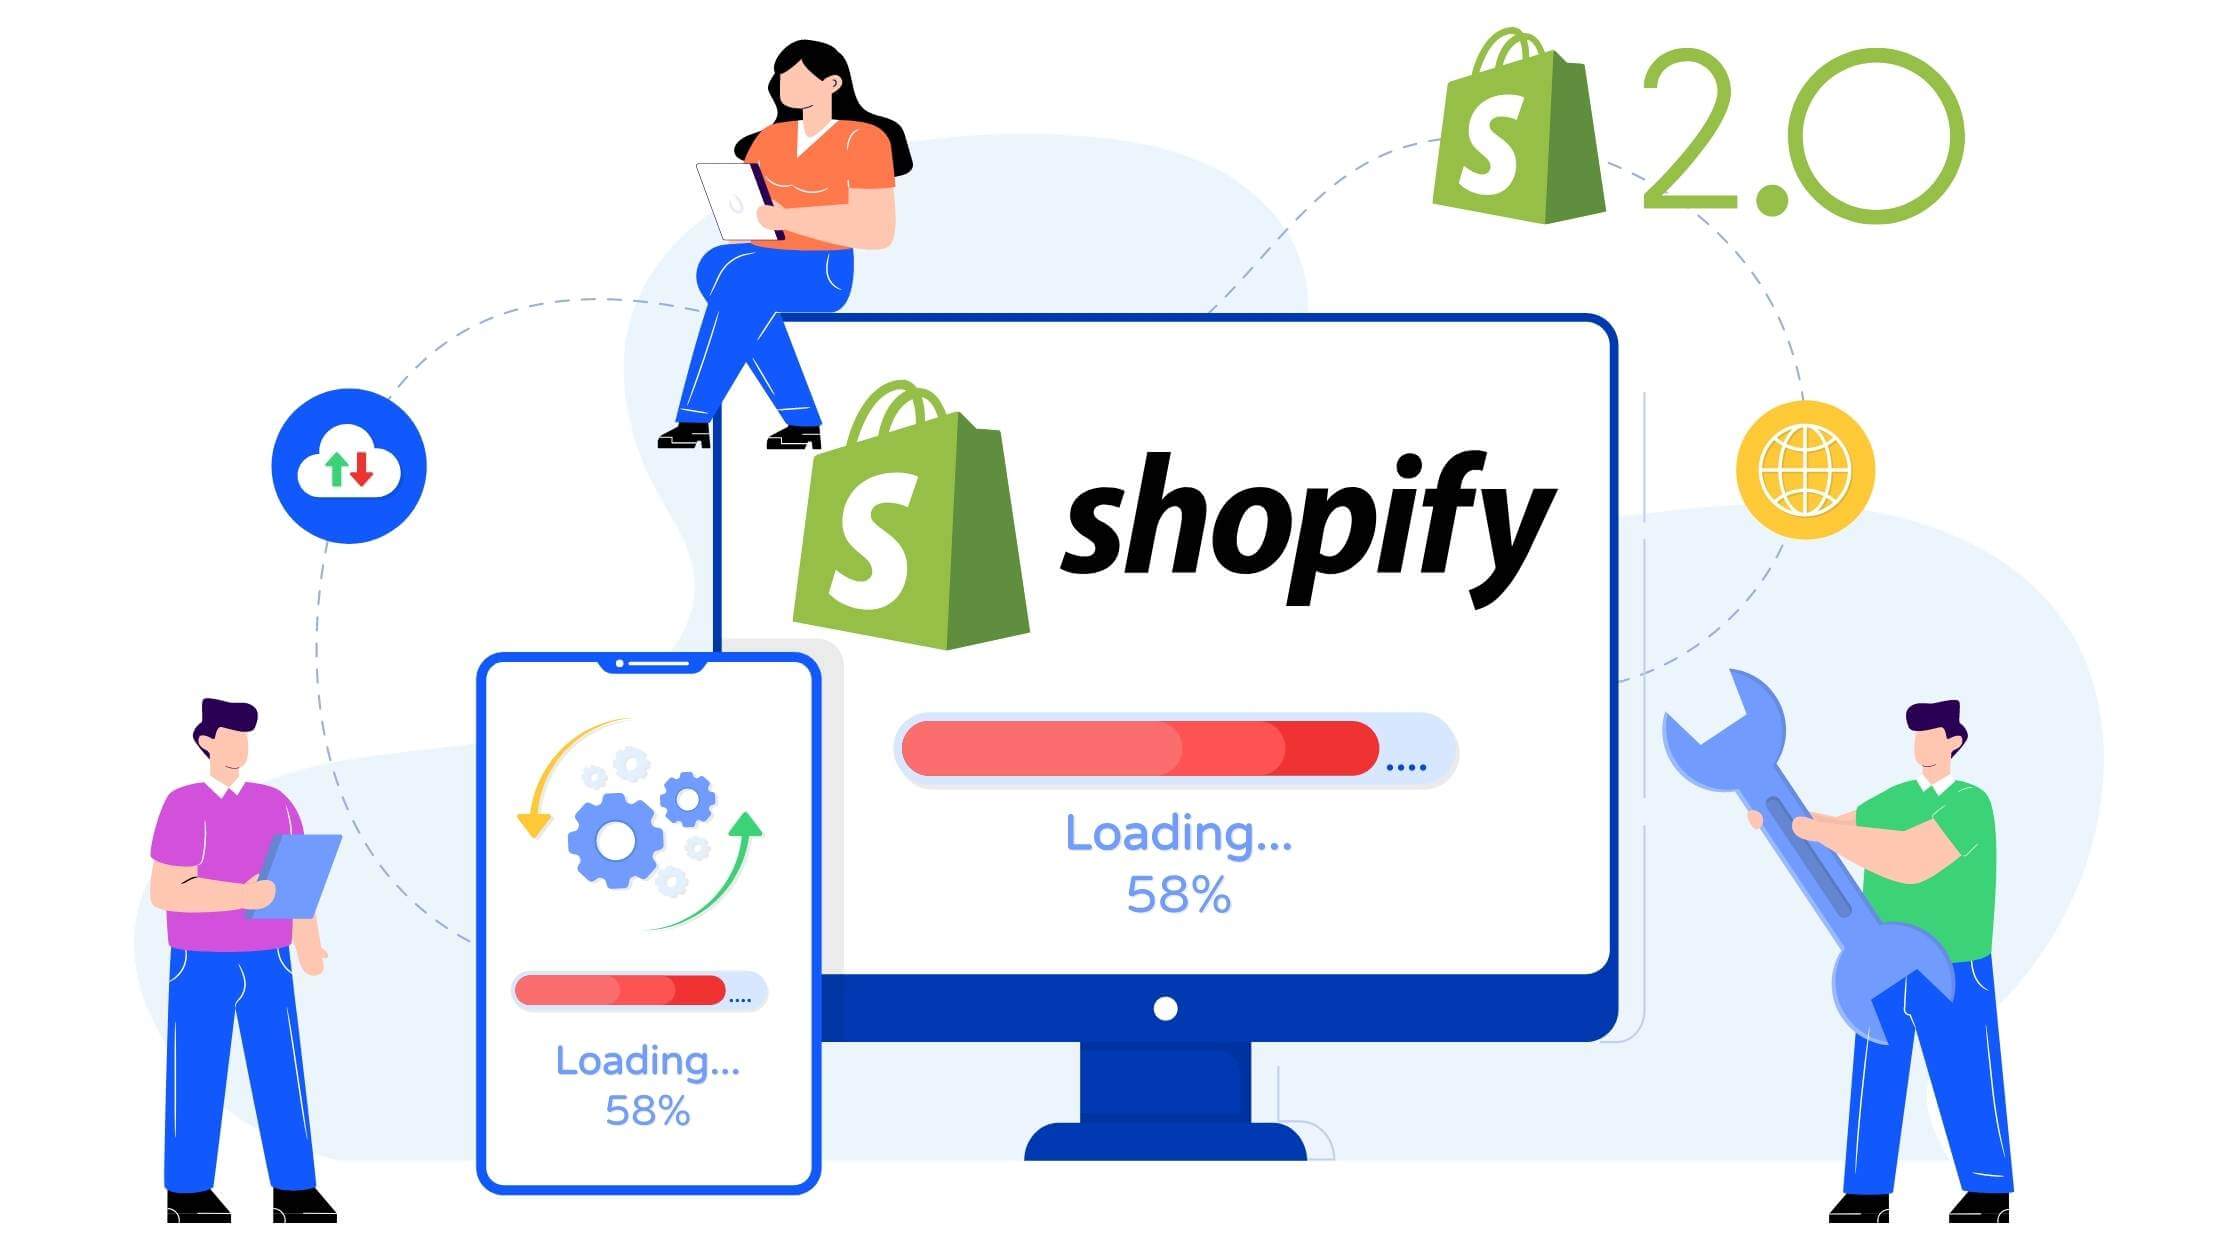 SHOPIFY AGENCY - WHAT DOES SHOPIFY 2.0 MEAN FOR YOUR SHOPIFY STORE